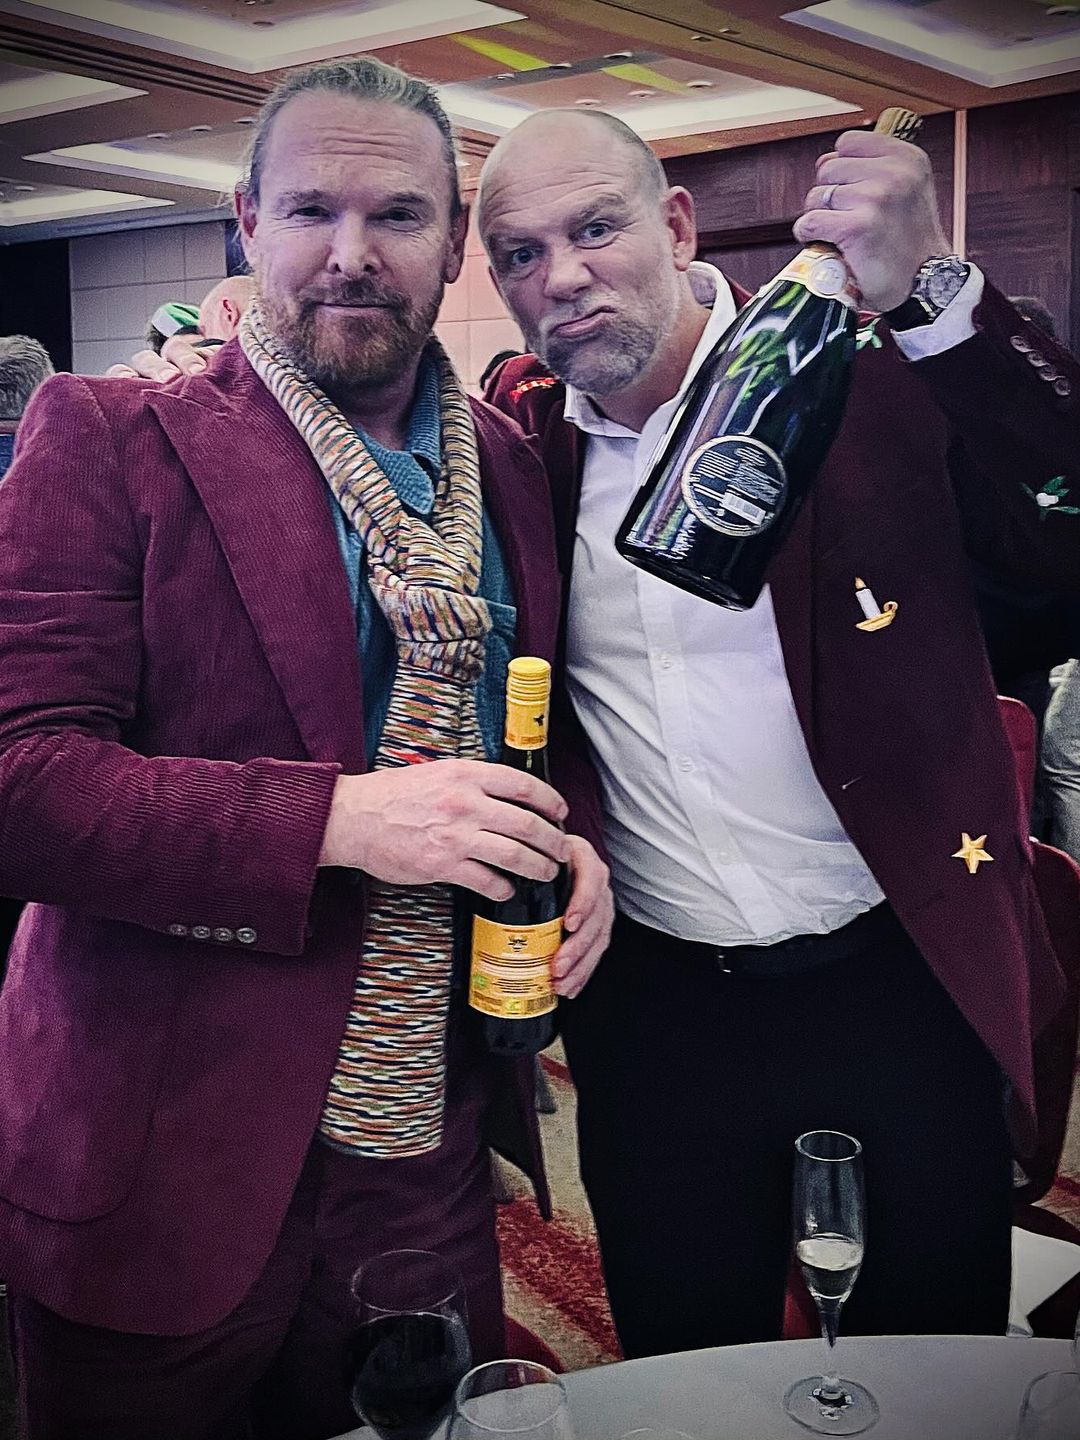 Mike Tindall in a burgundy jacket embroidered with Christmas motifs 